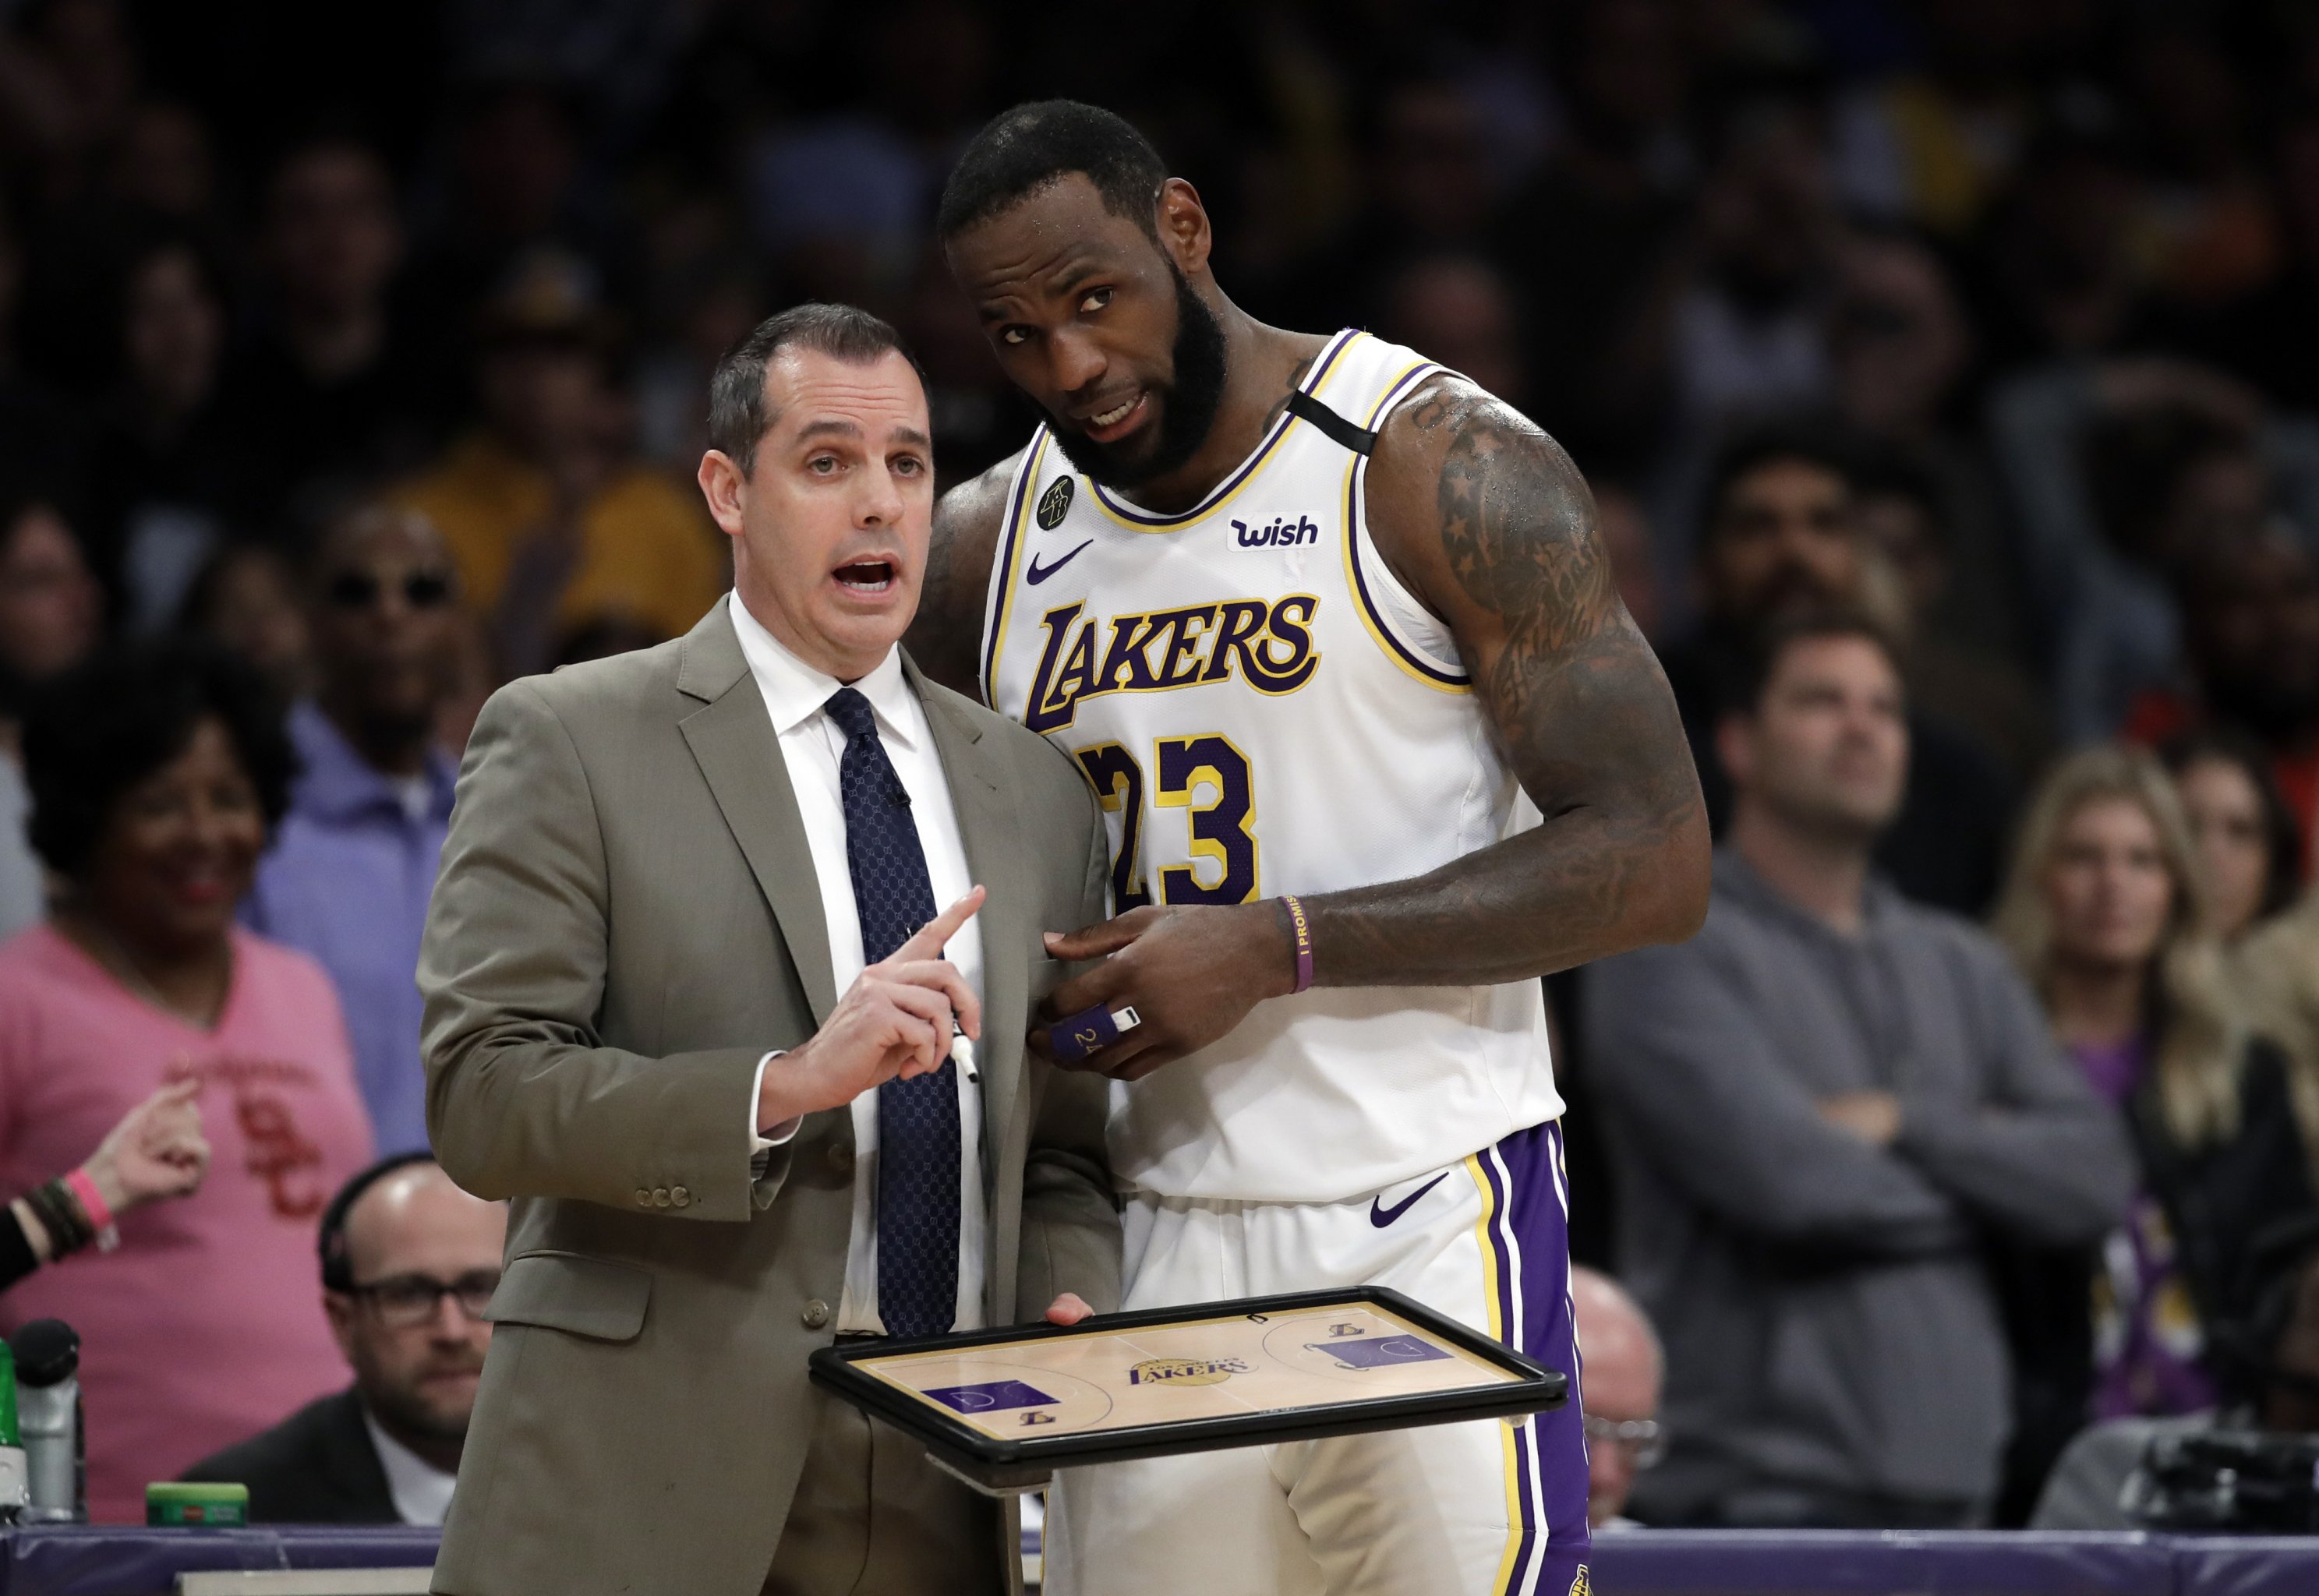 Kenny Smith: Lakers' bubble troubles 'starting to get concerning